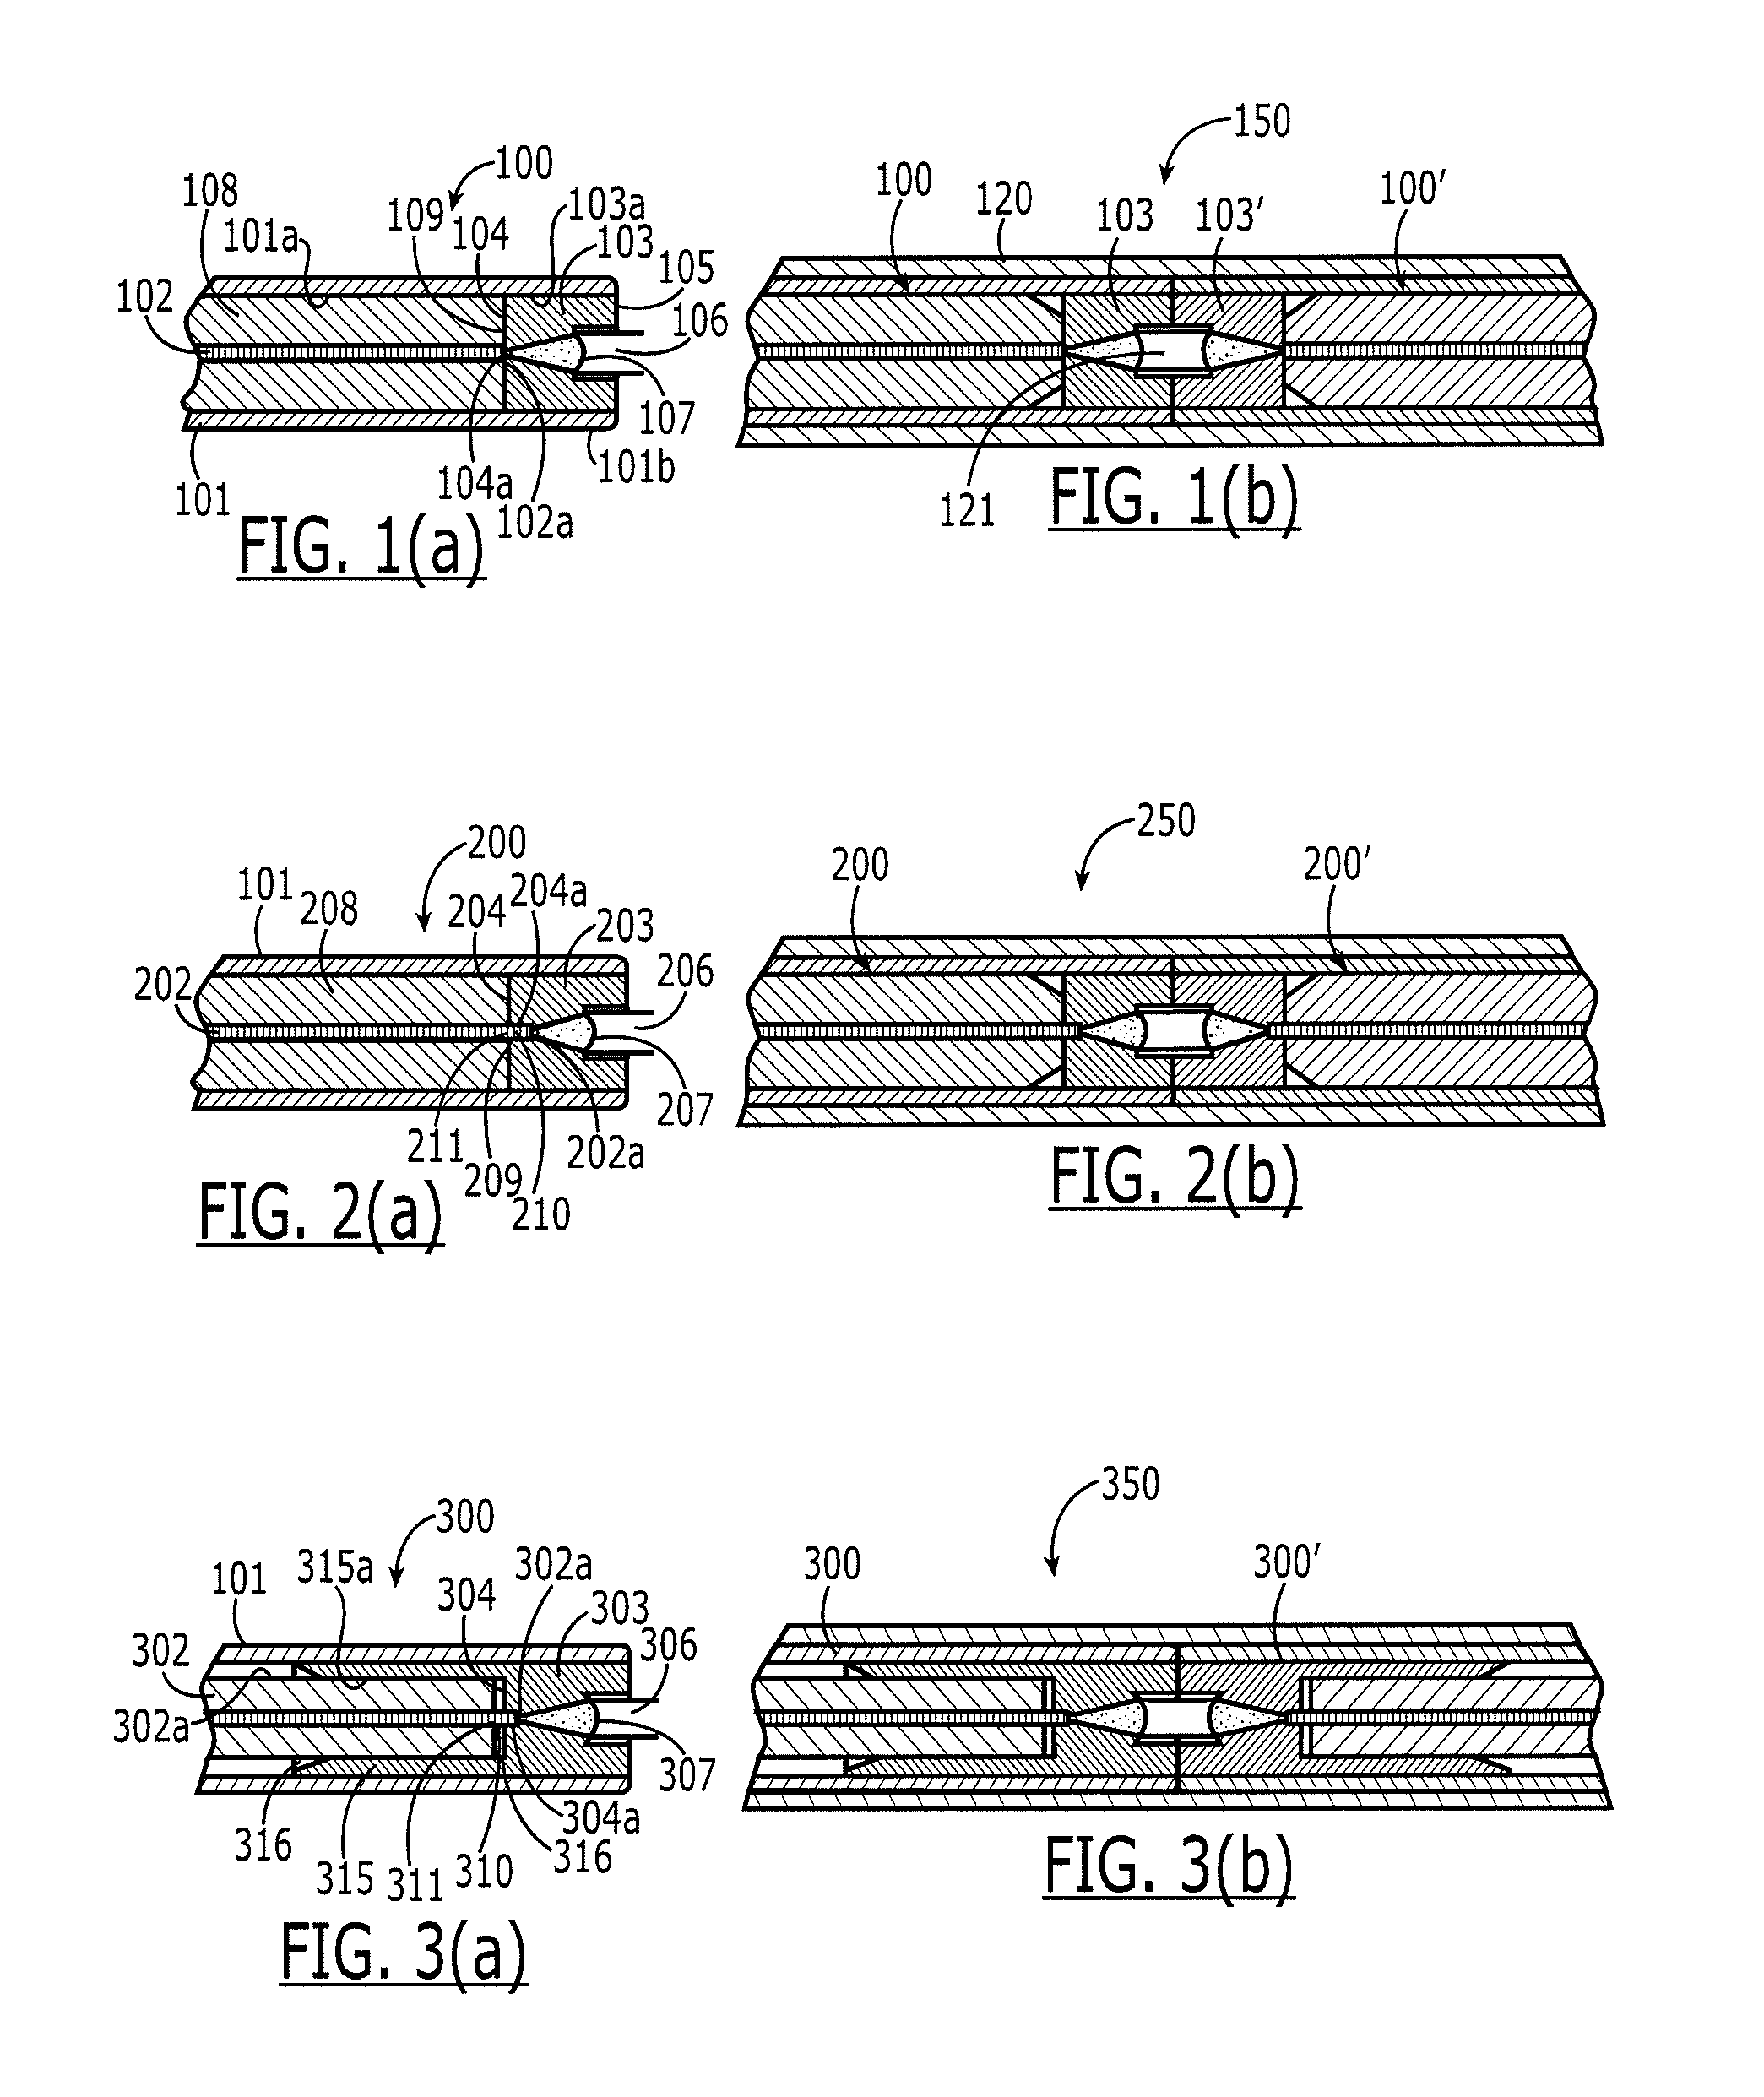 Expanded-beam connector with molded lens